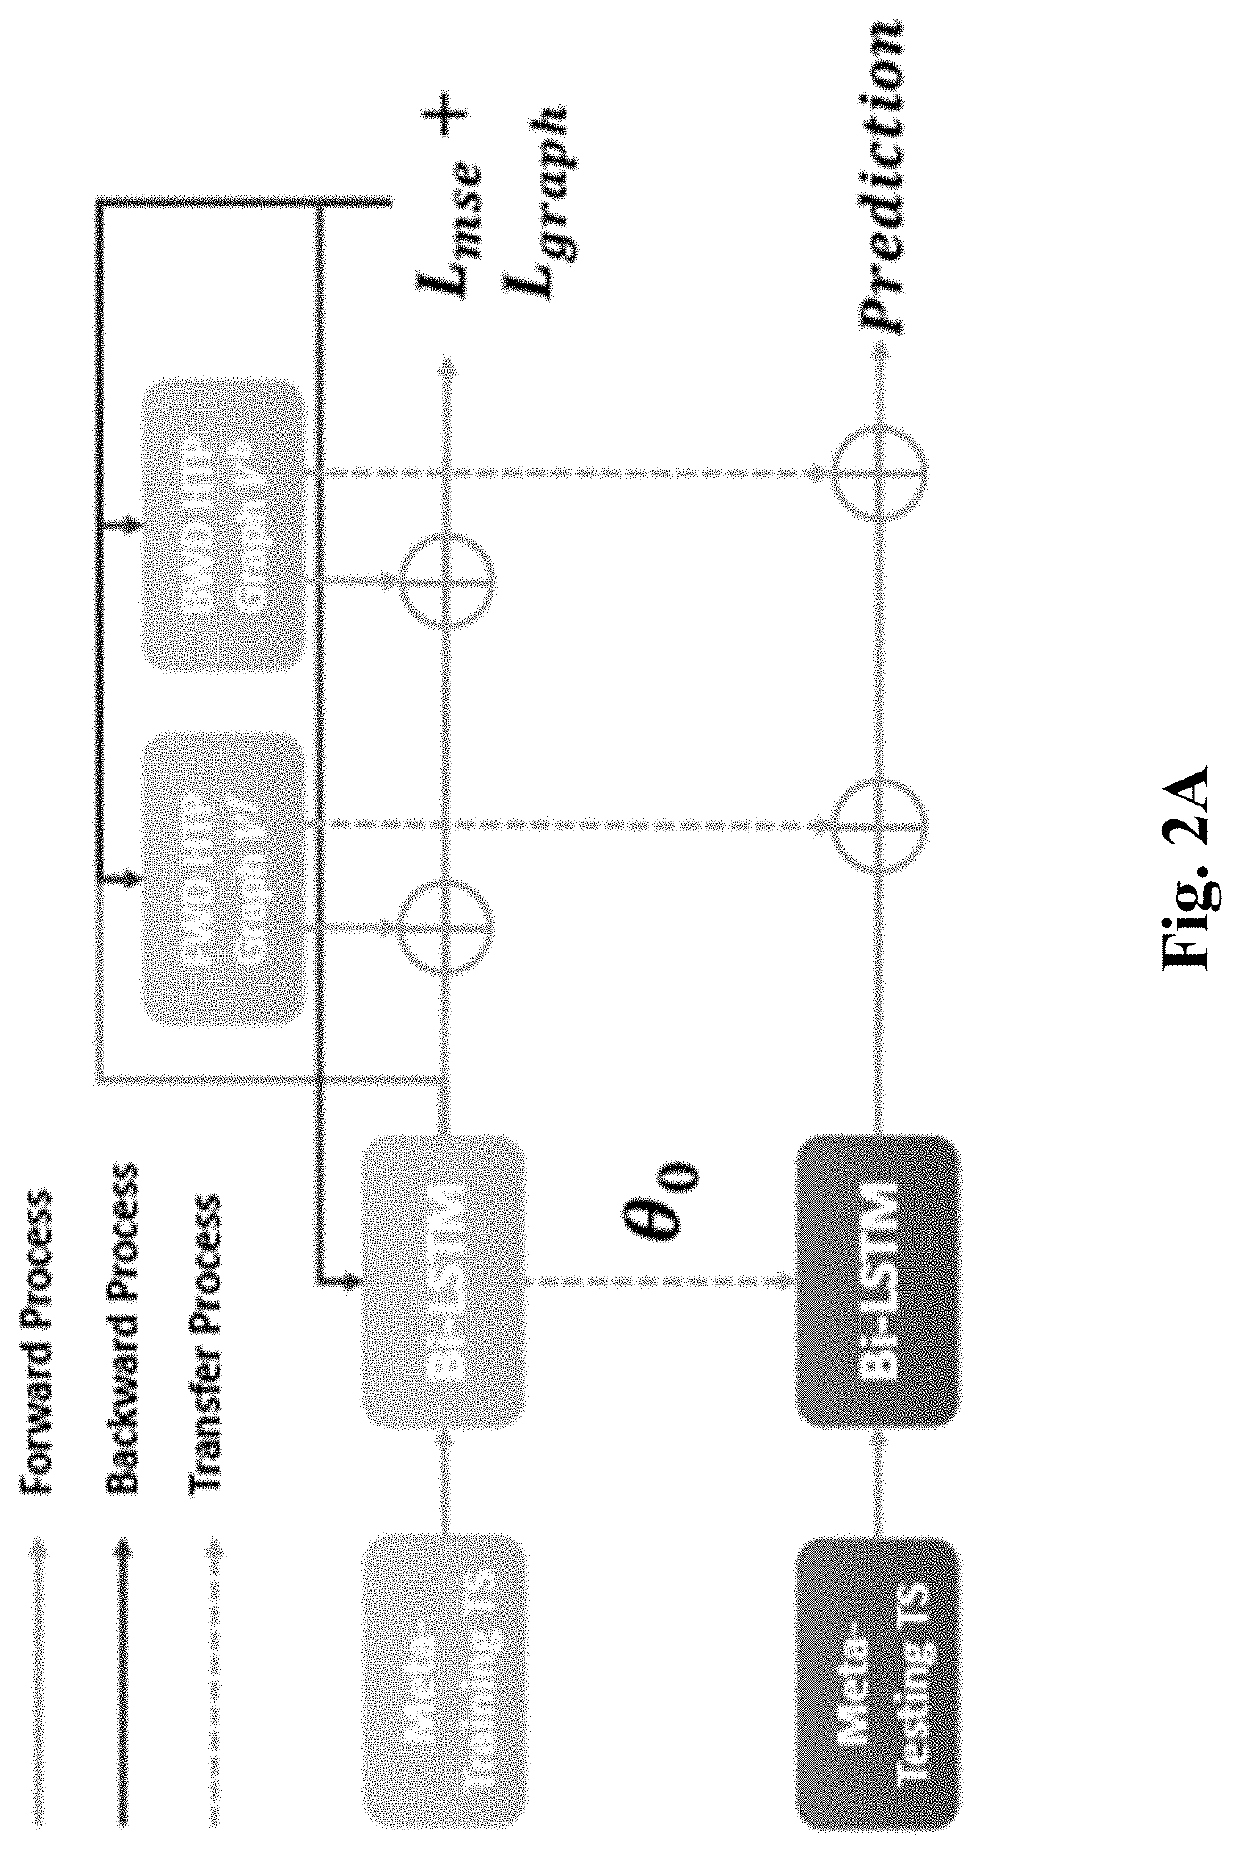 System and method for deep customized neural networks for time series forecasting